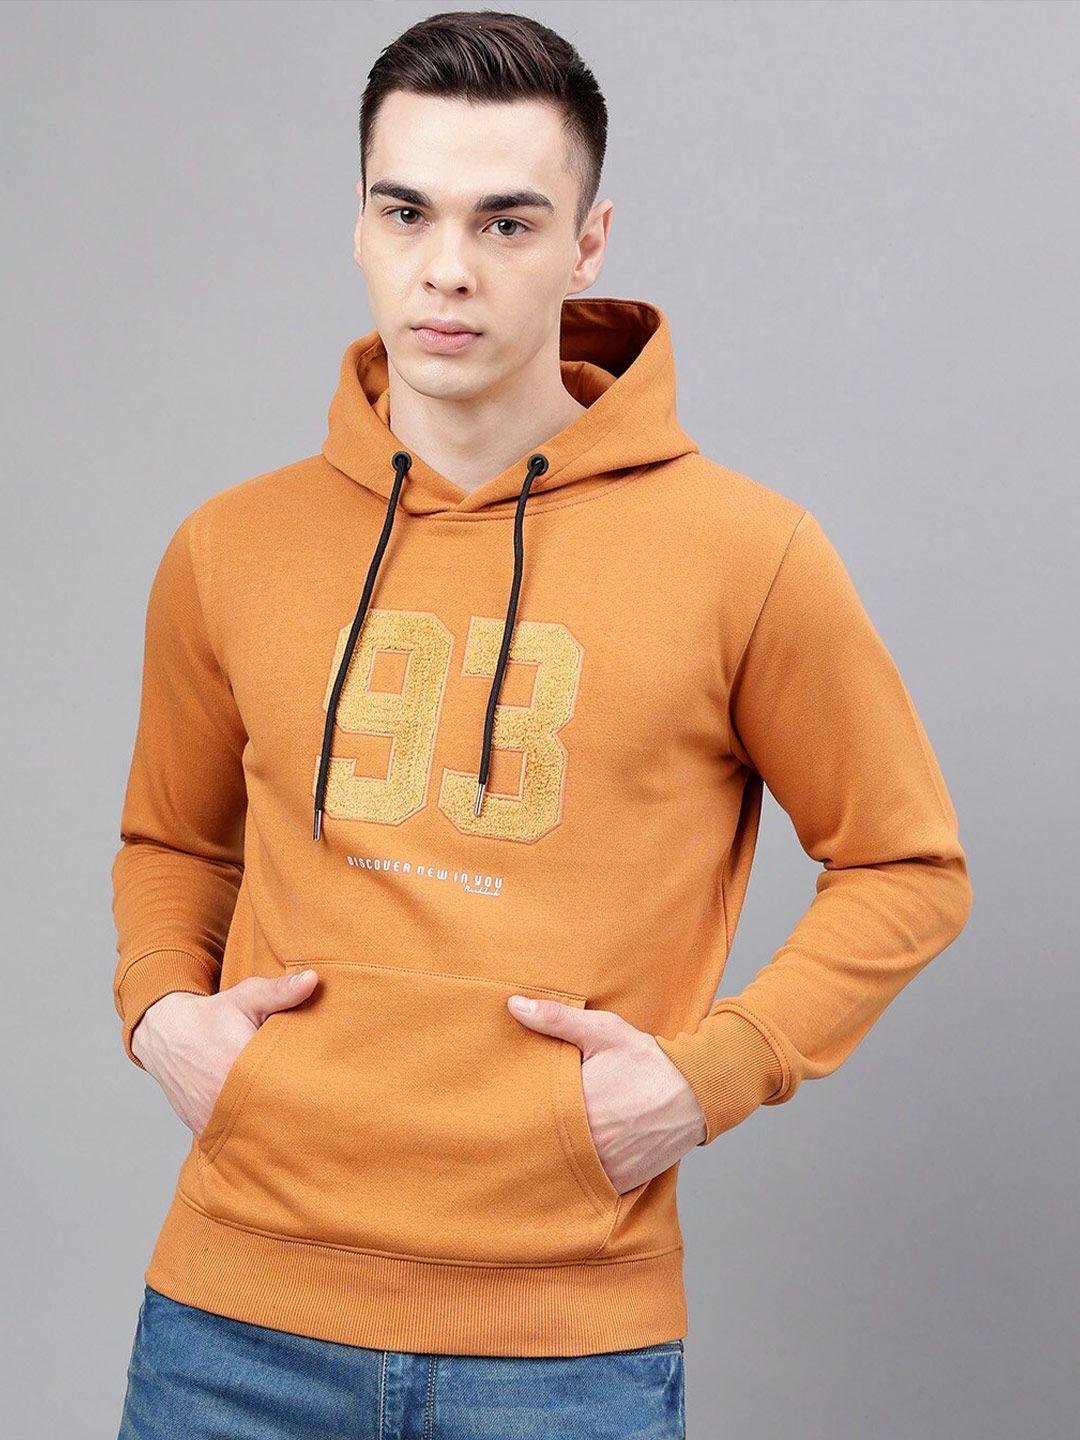 richlook typography printed hooded pullover